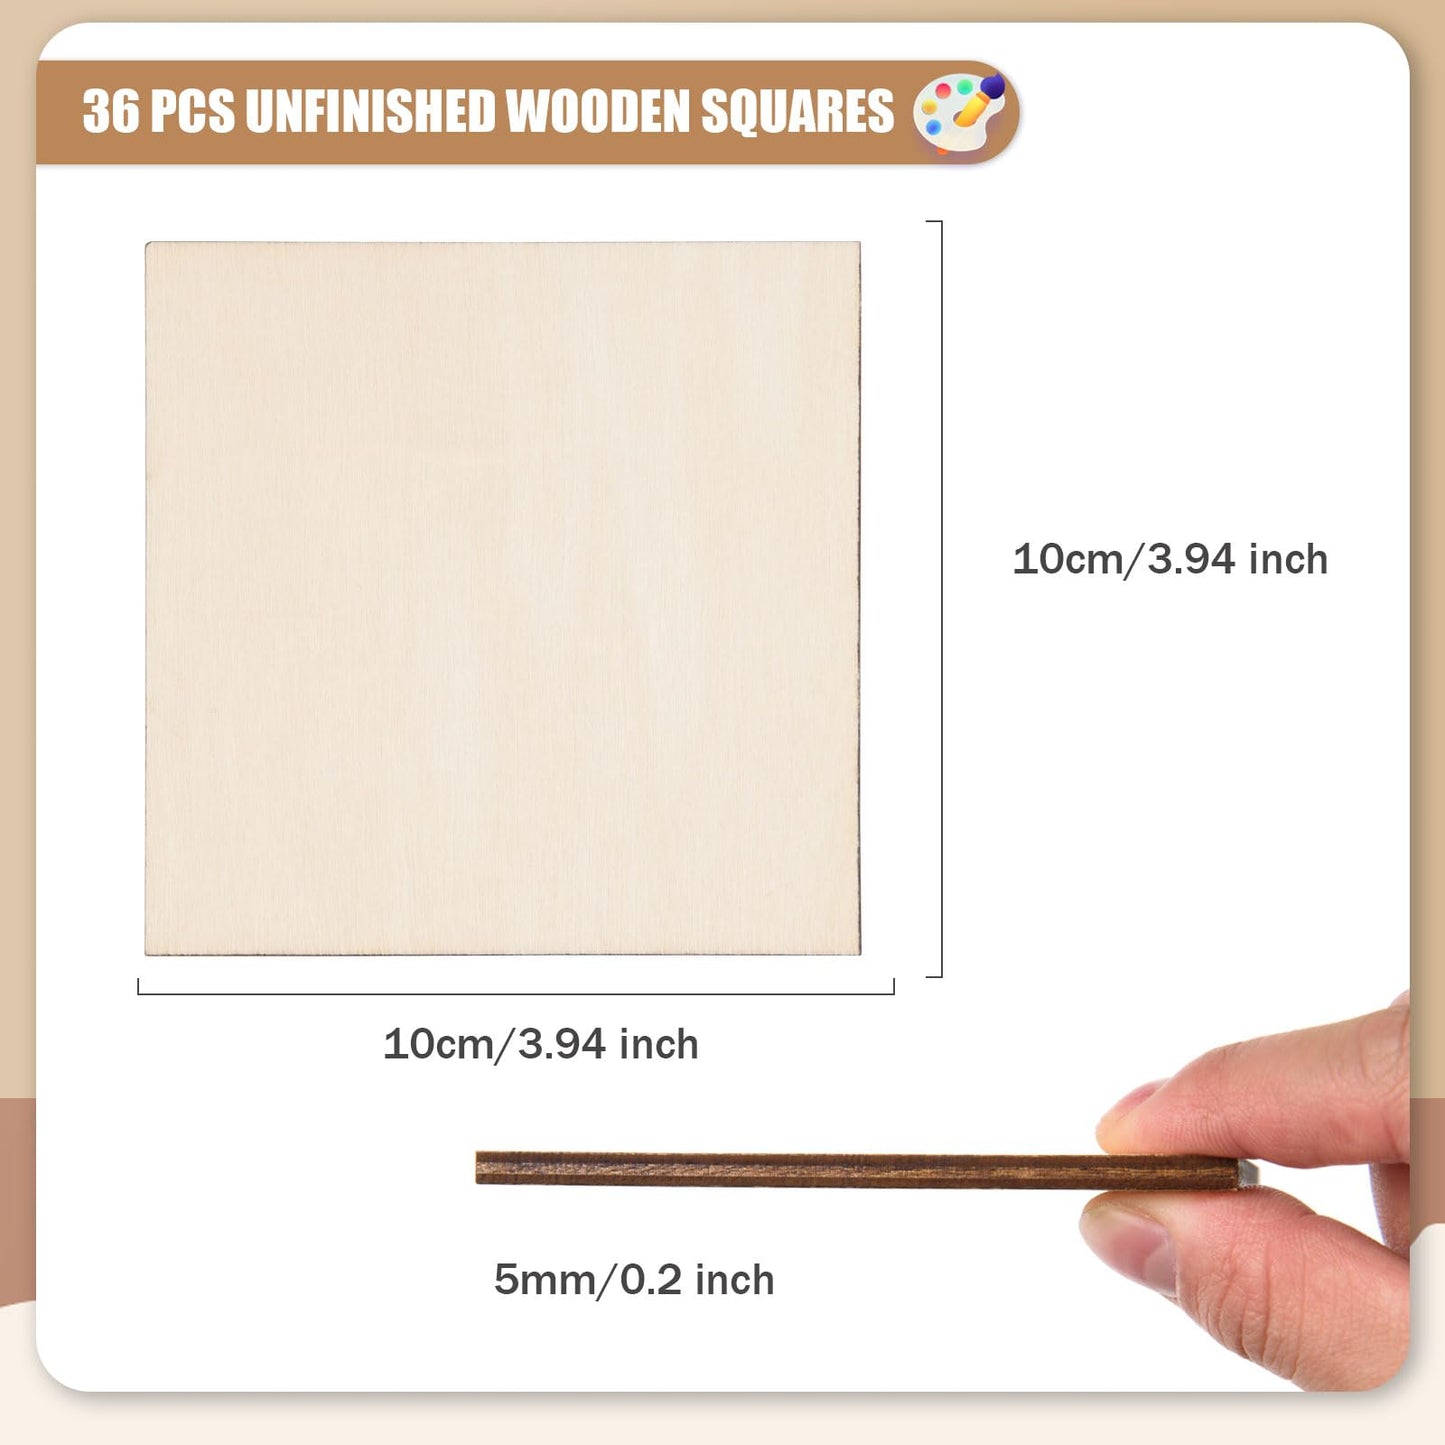 36 Pcs Unfinished Wooden Squares for Crafts 4x4 Inch Wood Square Cutouts Blank Square Wood Pieces Natural Wood Boards Slices for DIY Projects Coasters Scrabble Tiles Painting Wood Burning,0.2" Thick